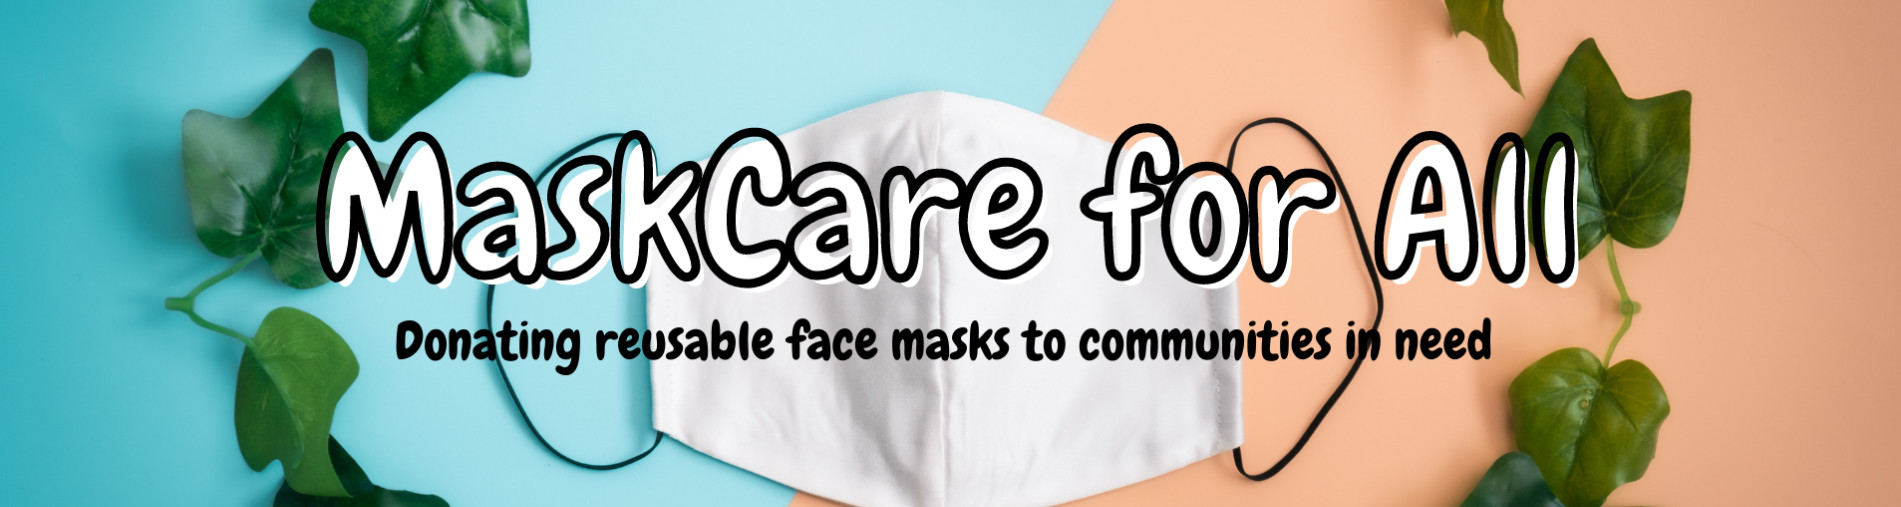 MaskCare for All Campaign